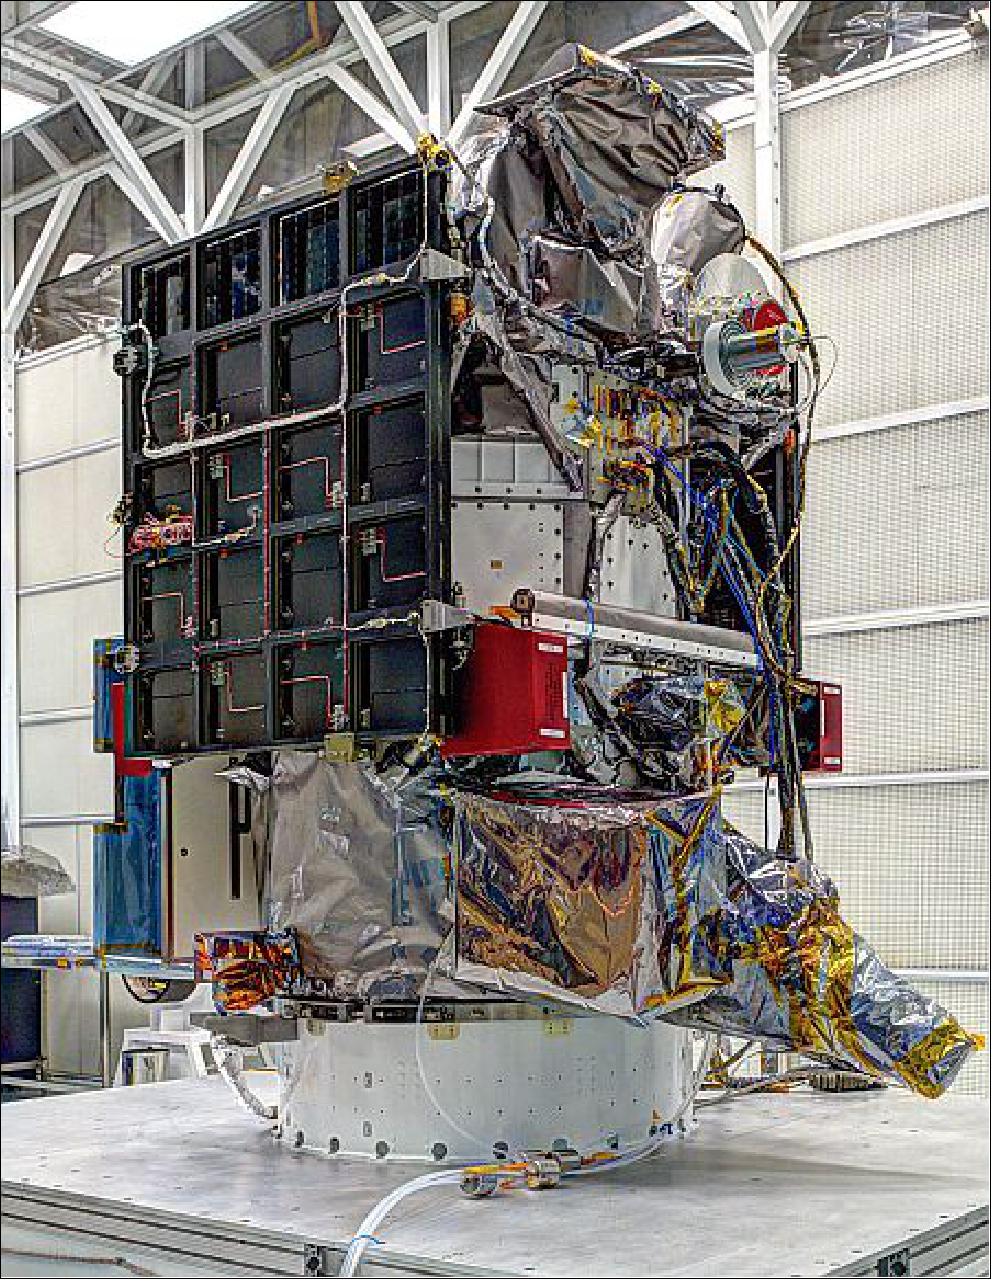 Figure 5: Photo of the DSCOVR spacecraft at NASA/GSFC prior to shipment to Cape Canaveral, FL (image credit: NASA)